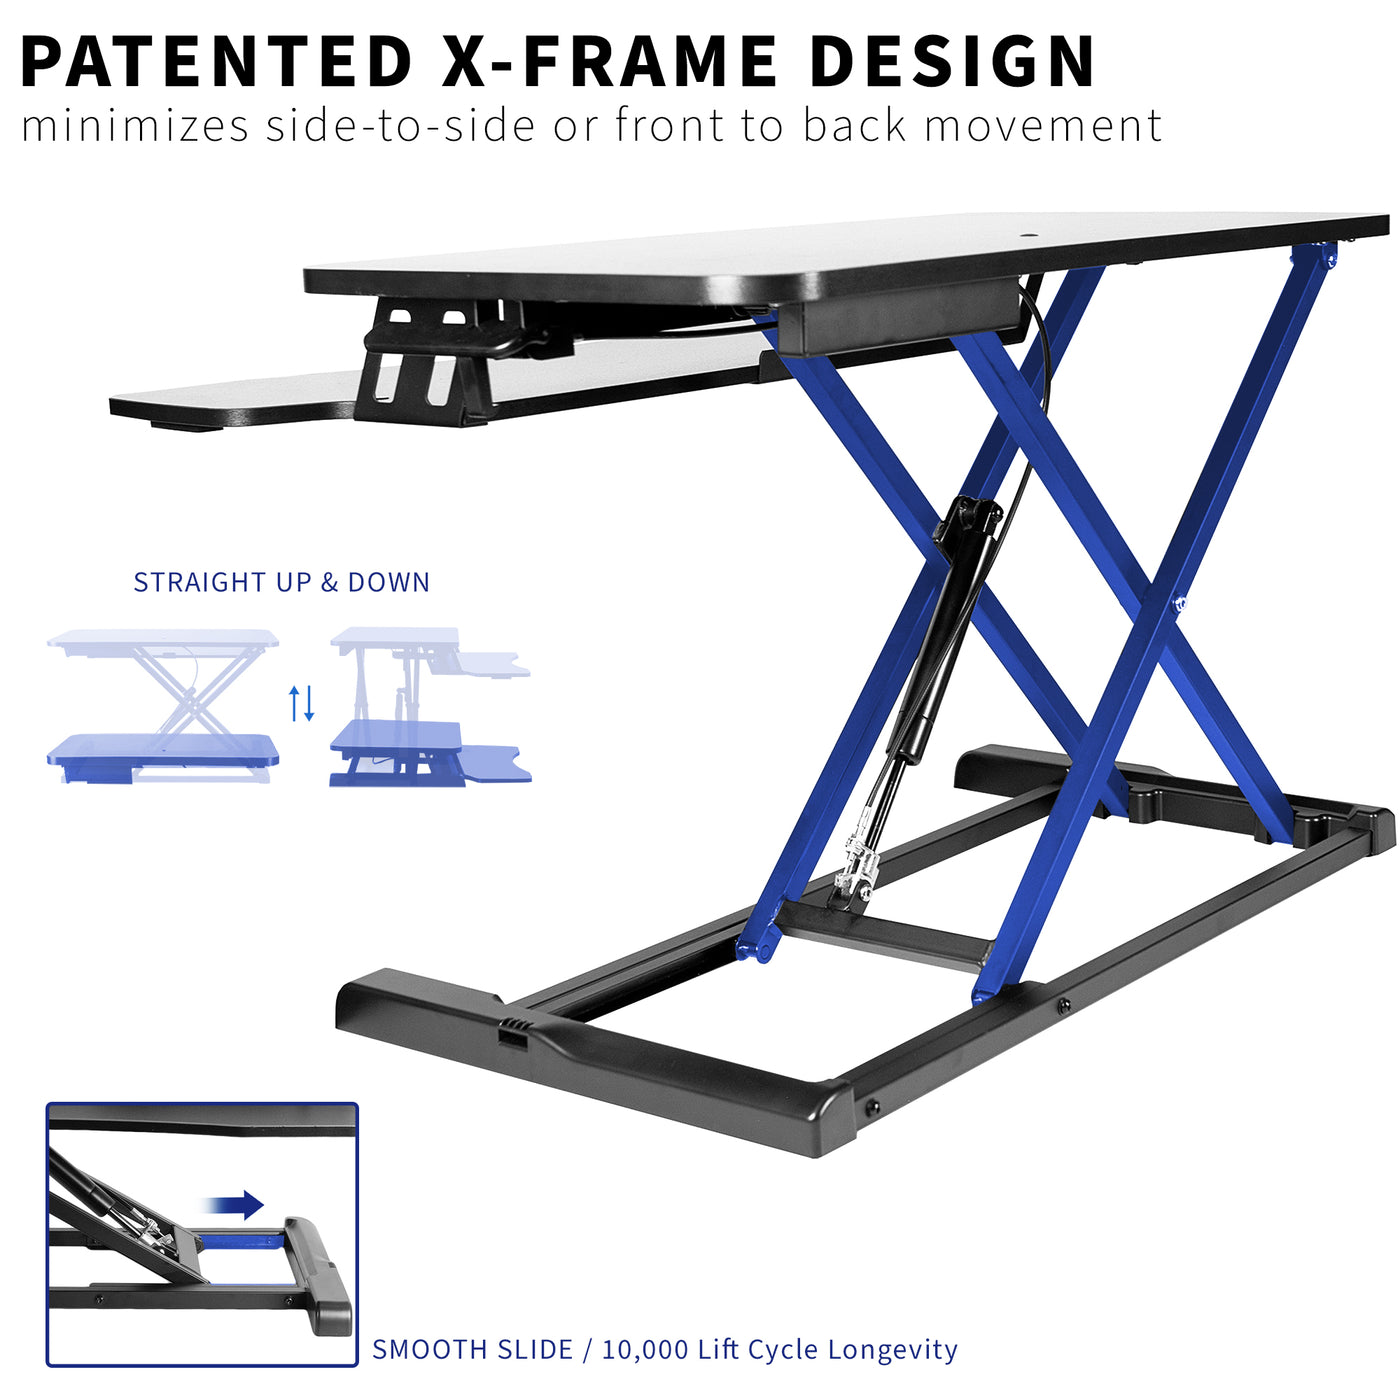 X-frame design that keeps your equipment safely elevated when moving straight up or down.